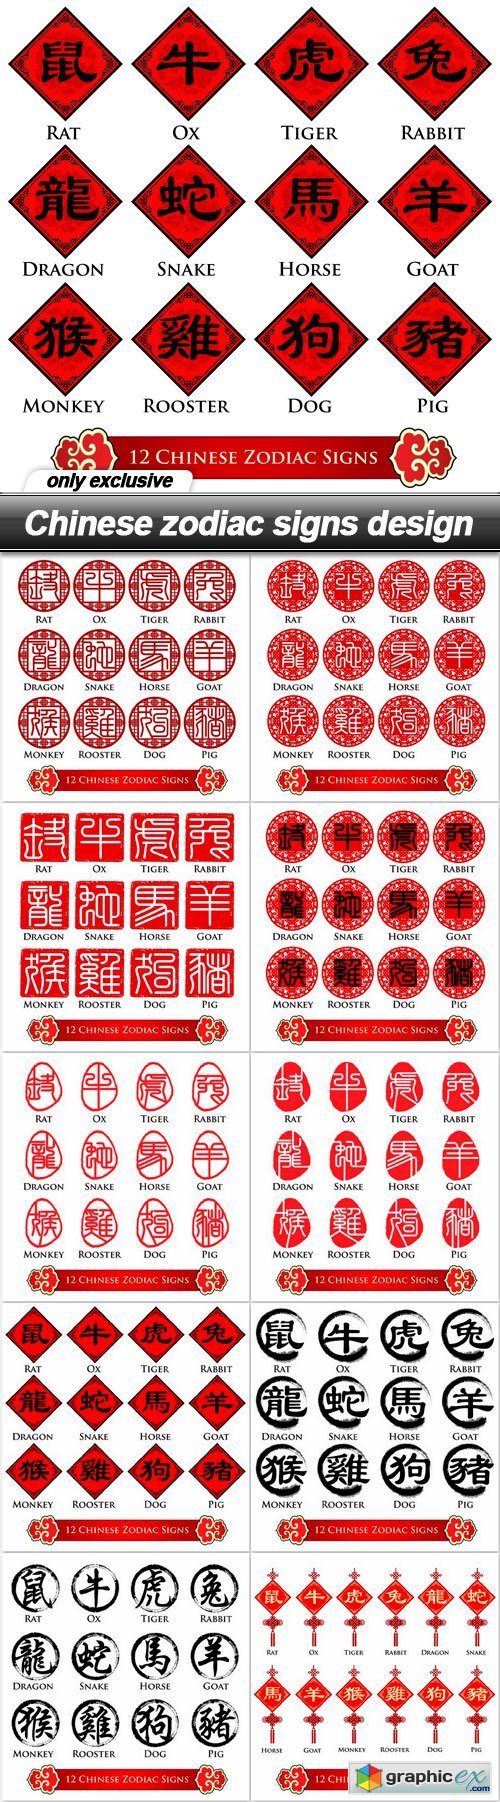 Chinese zodiac signs design - 10 EPS